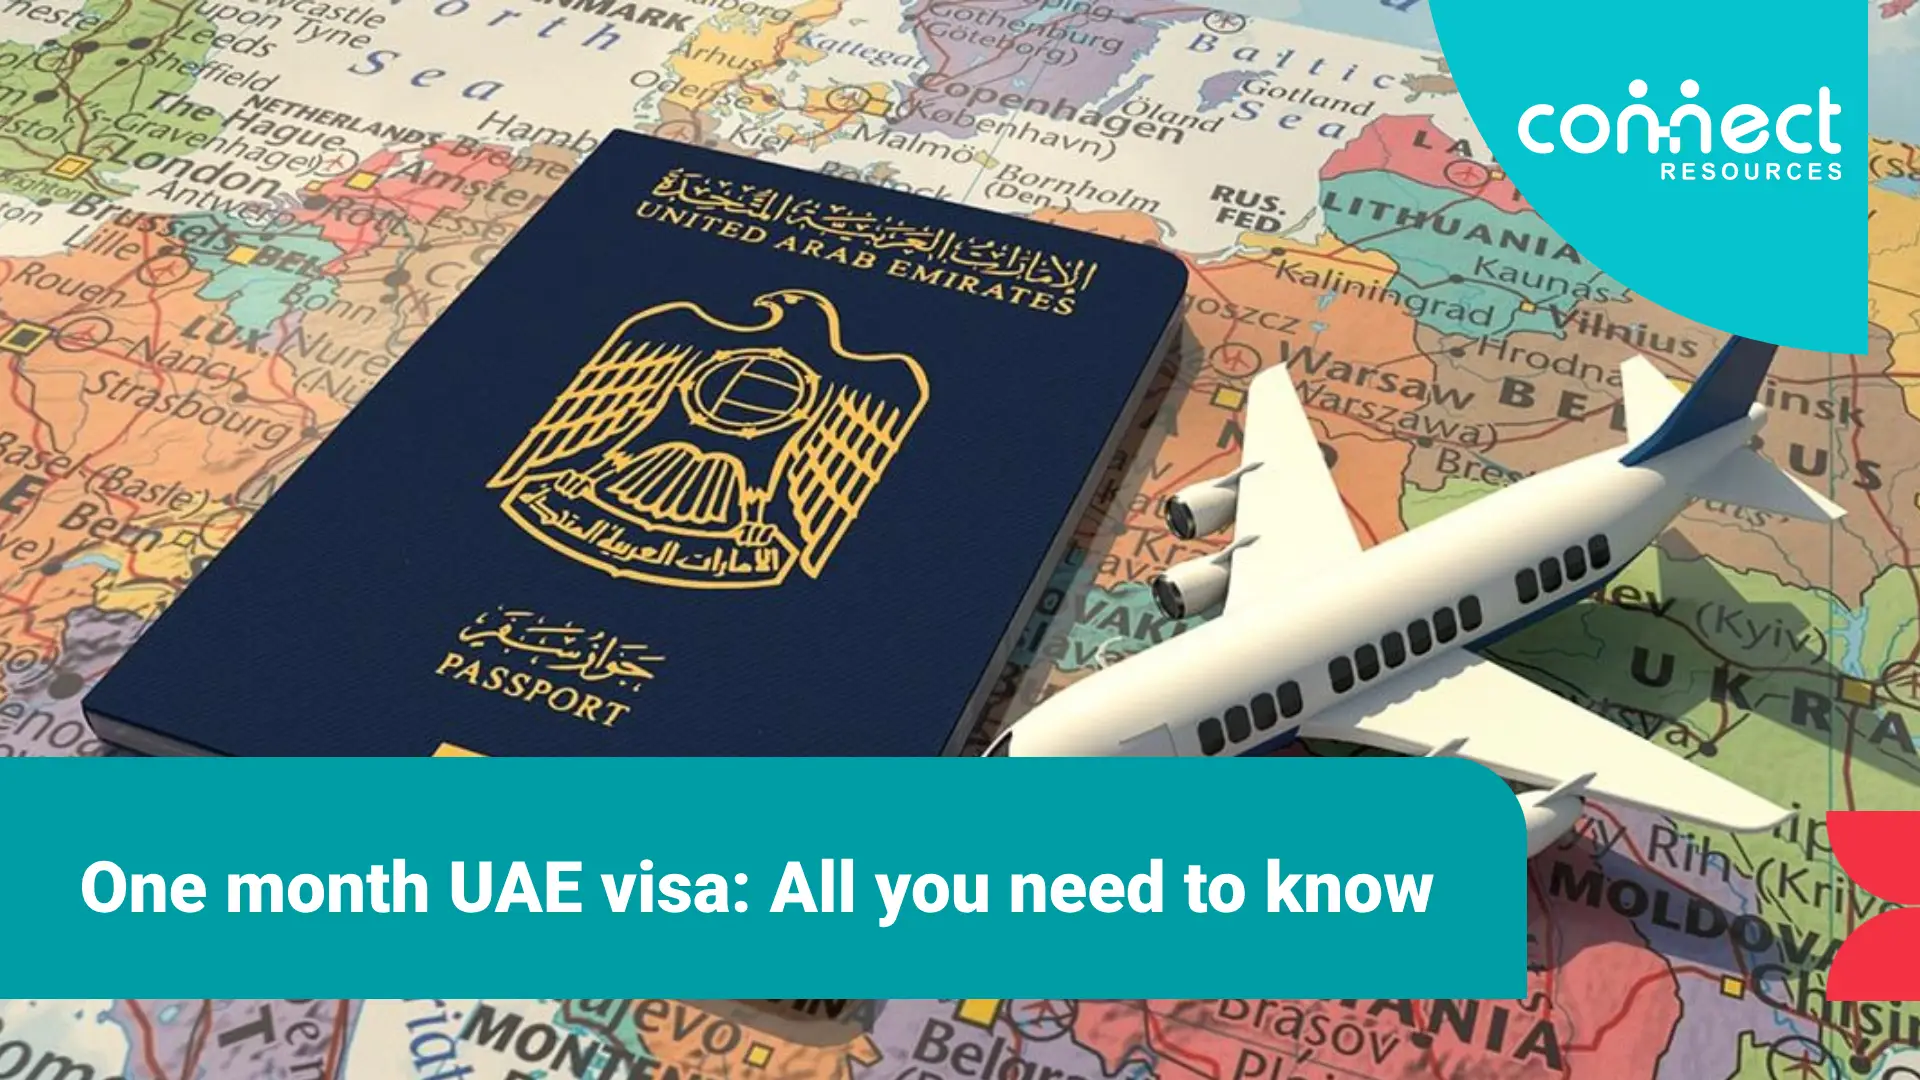 Uncover the UAE's treasures for a month with a one-month visa. Explore the vibrant cities, immerse in rich culture, and experience unforgettable adventures.